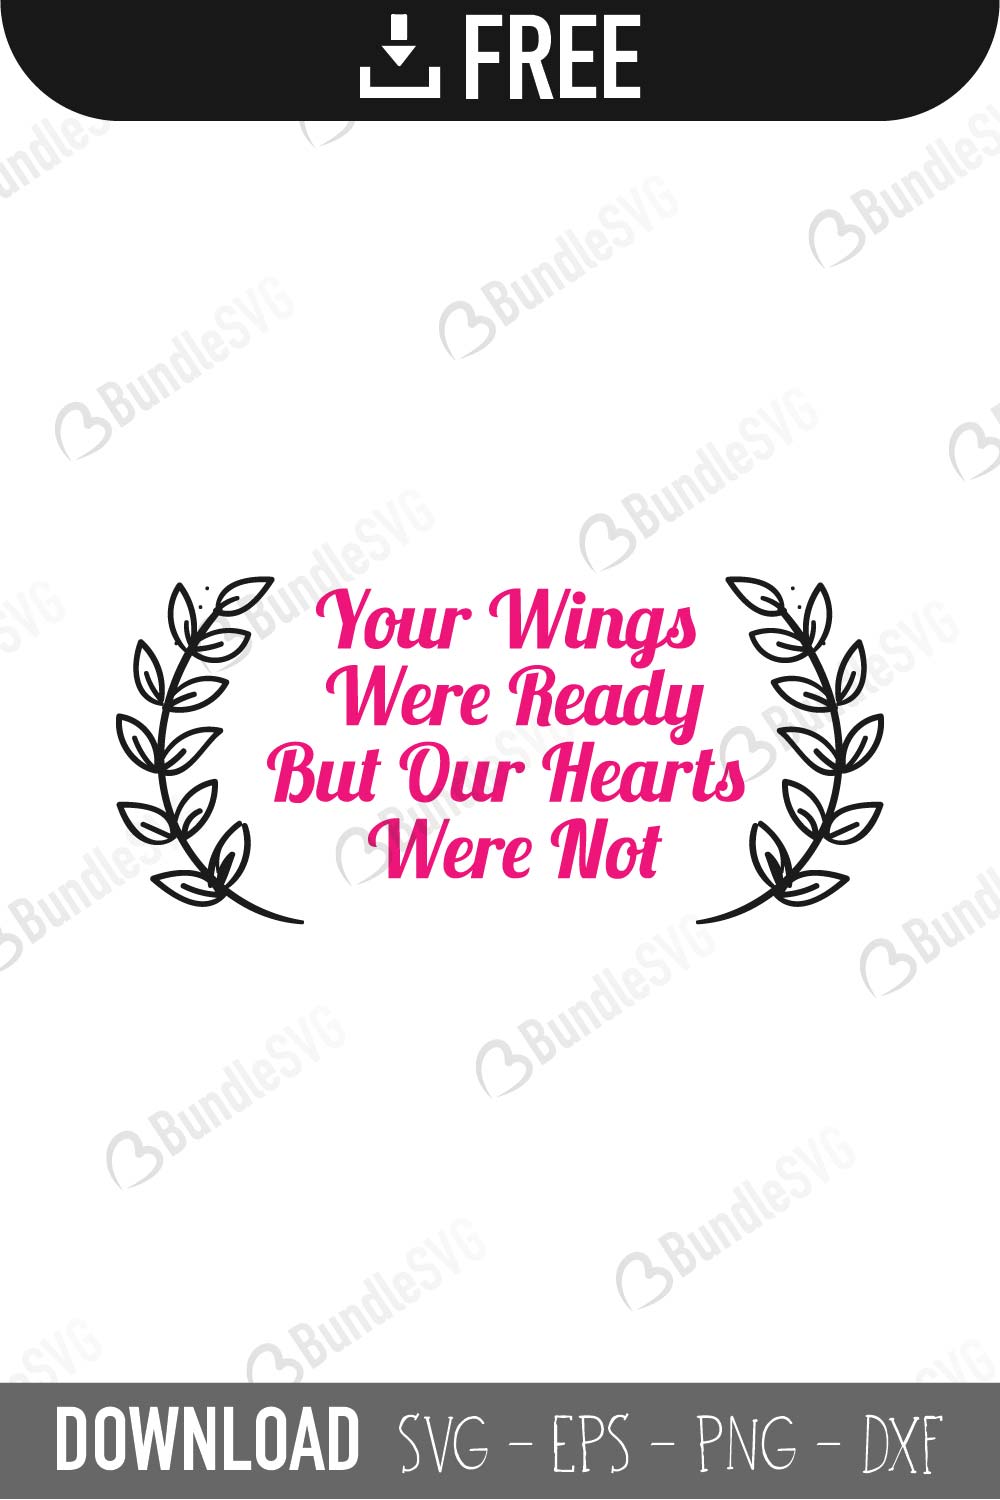 Download Your Wings Were Ready But My Heart Was Not Svg Cut Files Bundlesvg